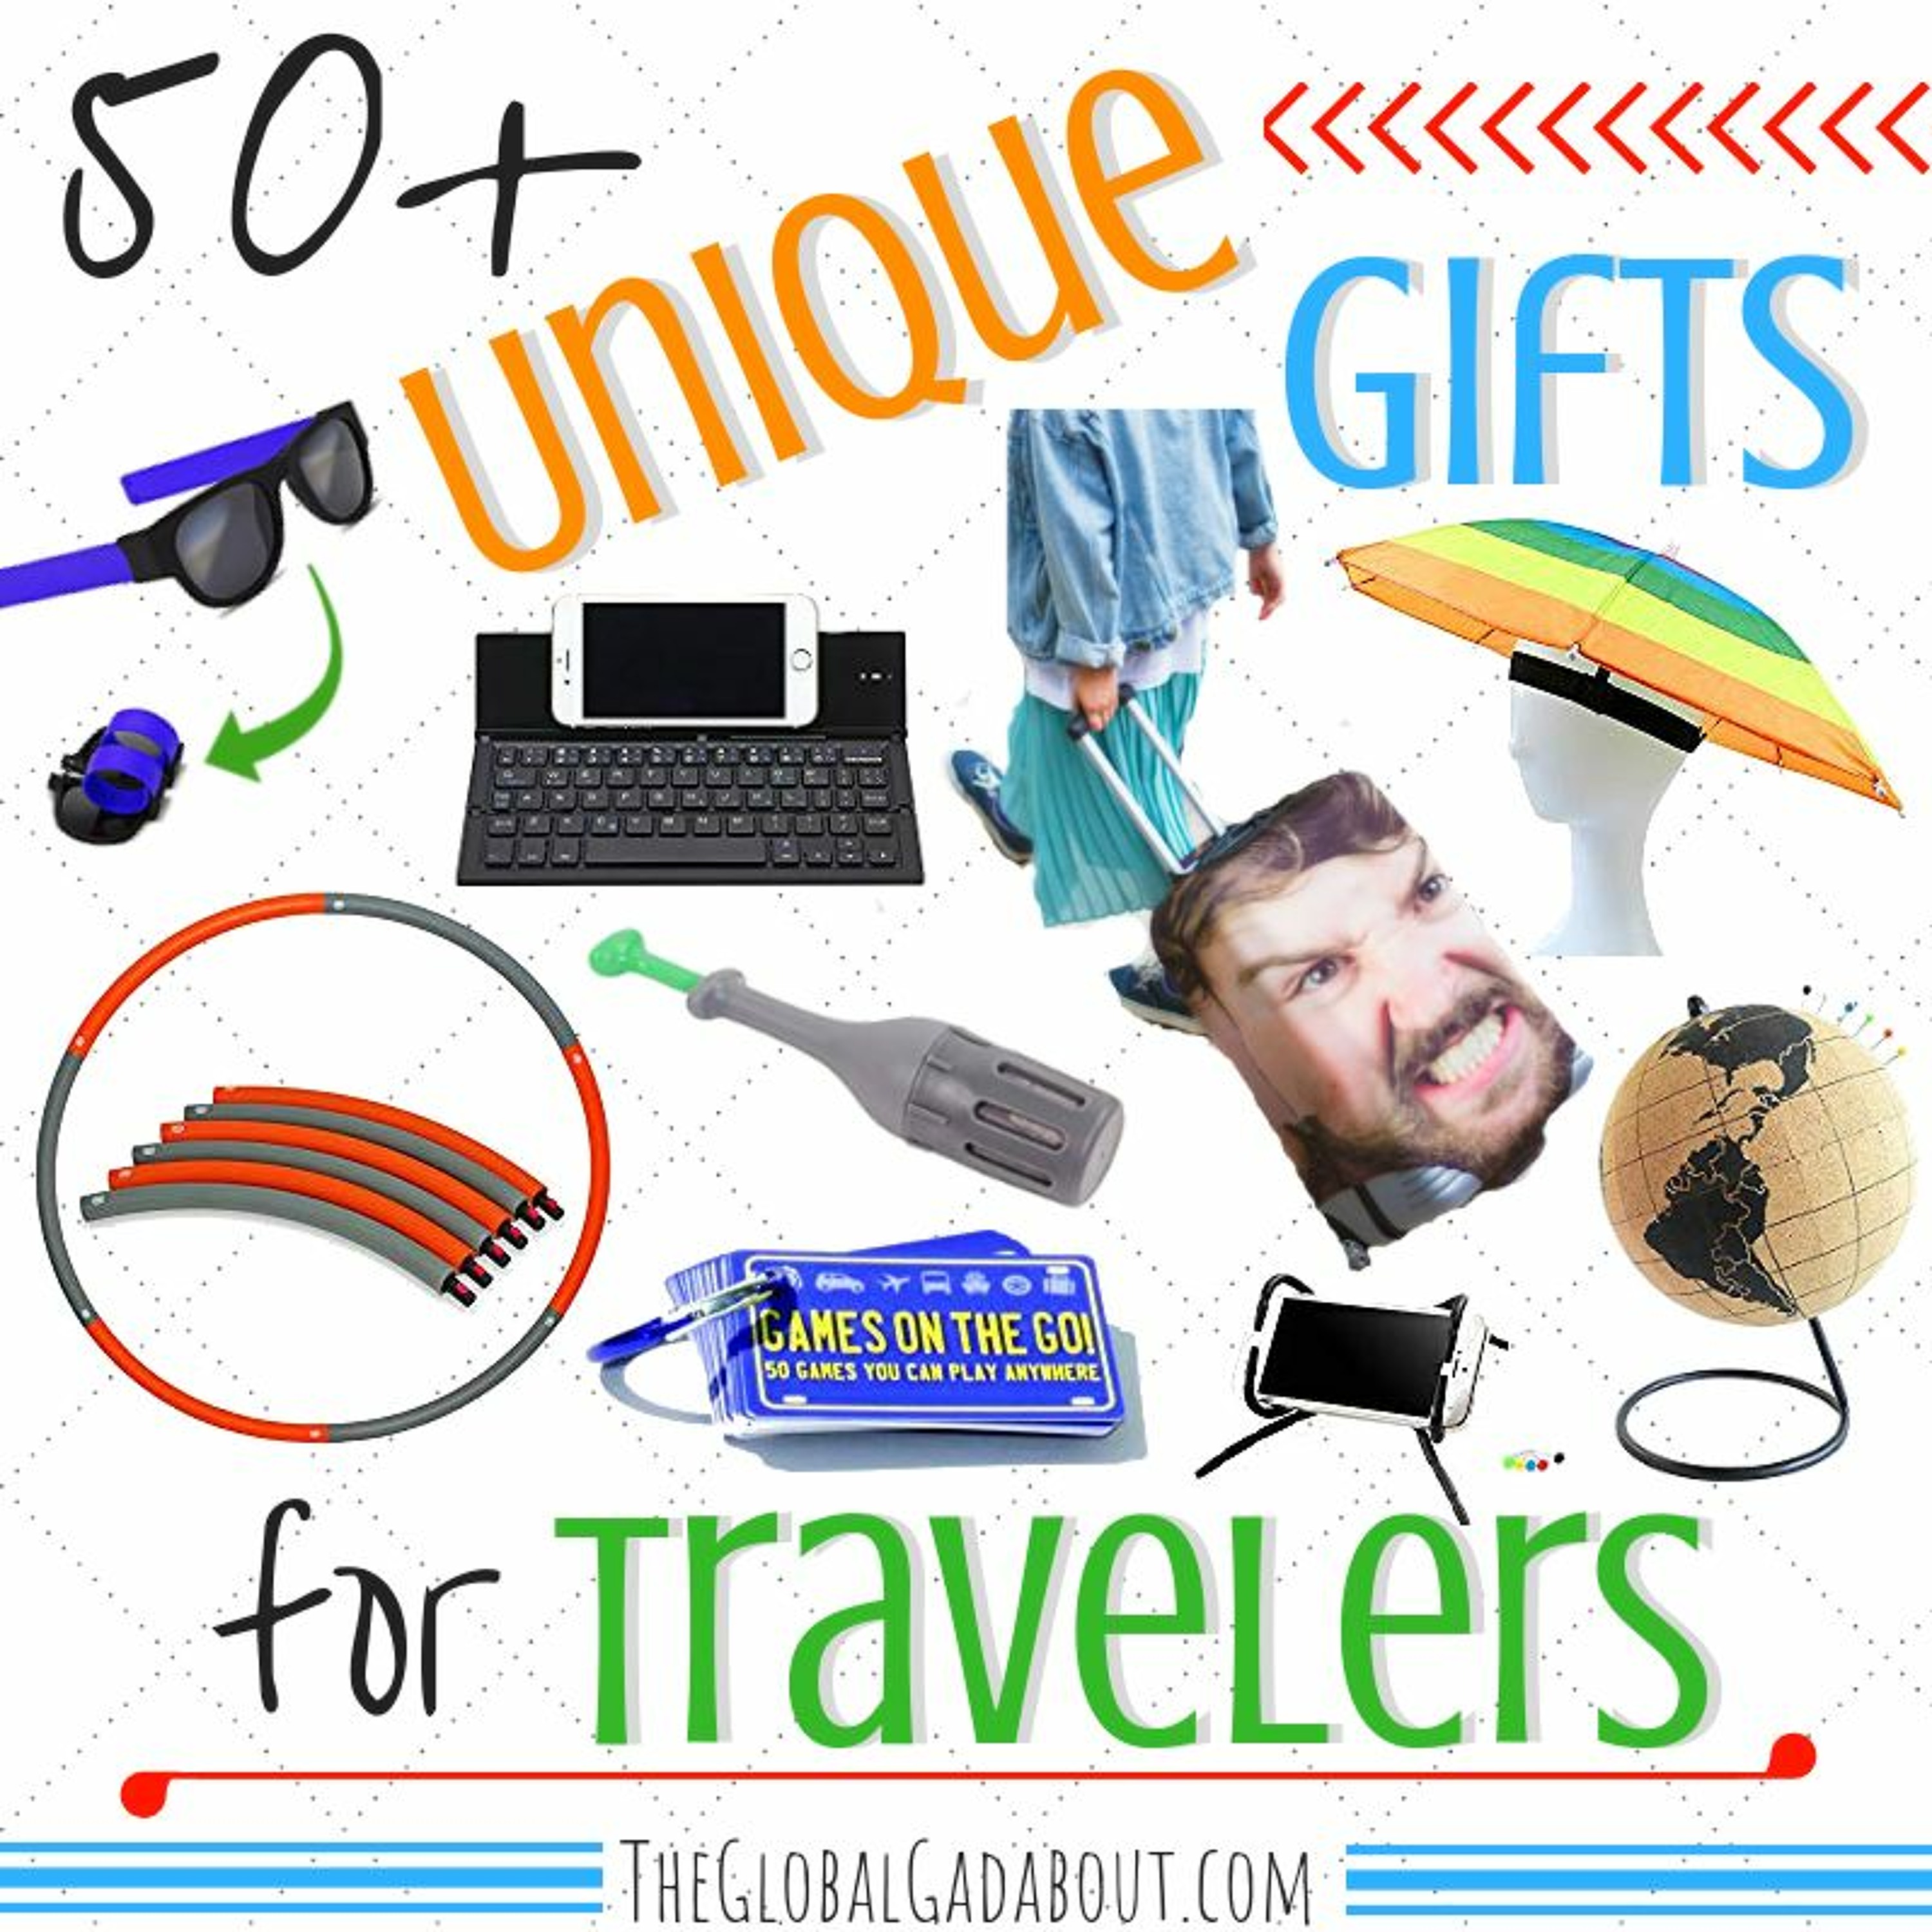 50+ Unique Travel Gifts